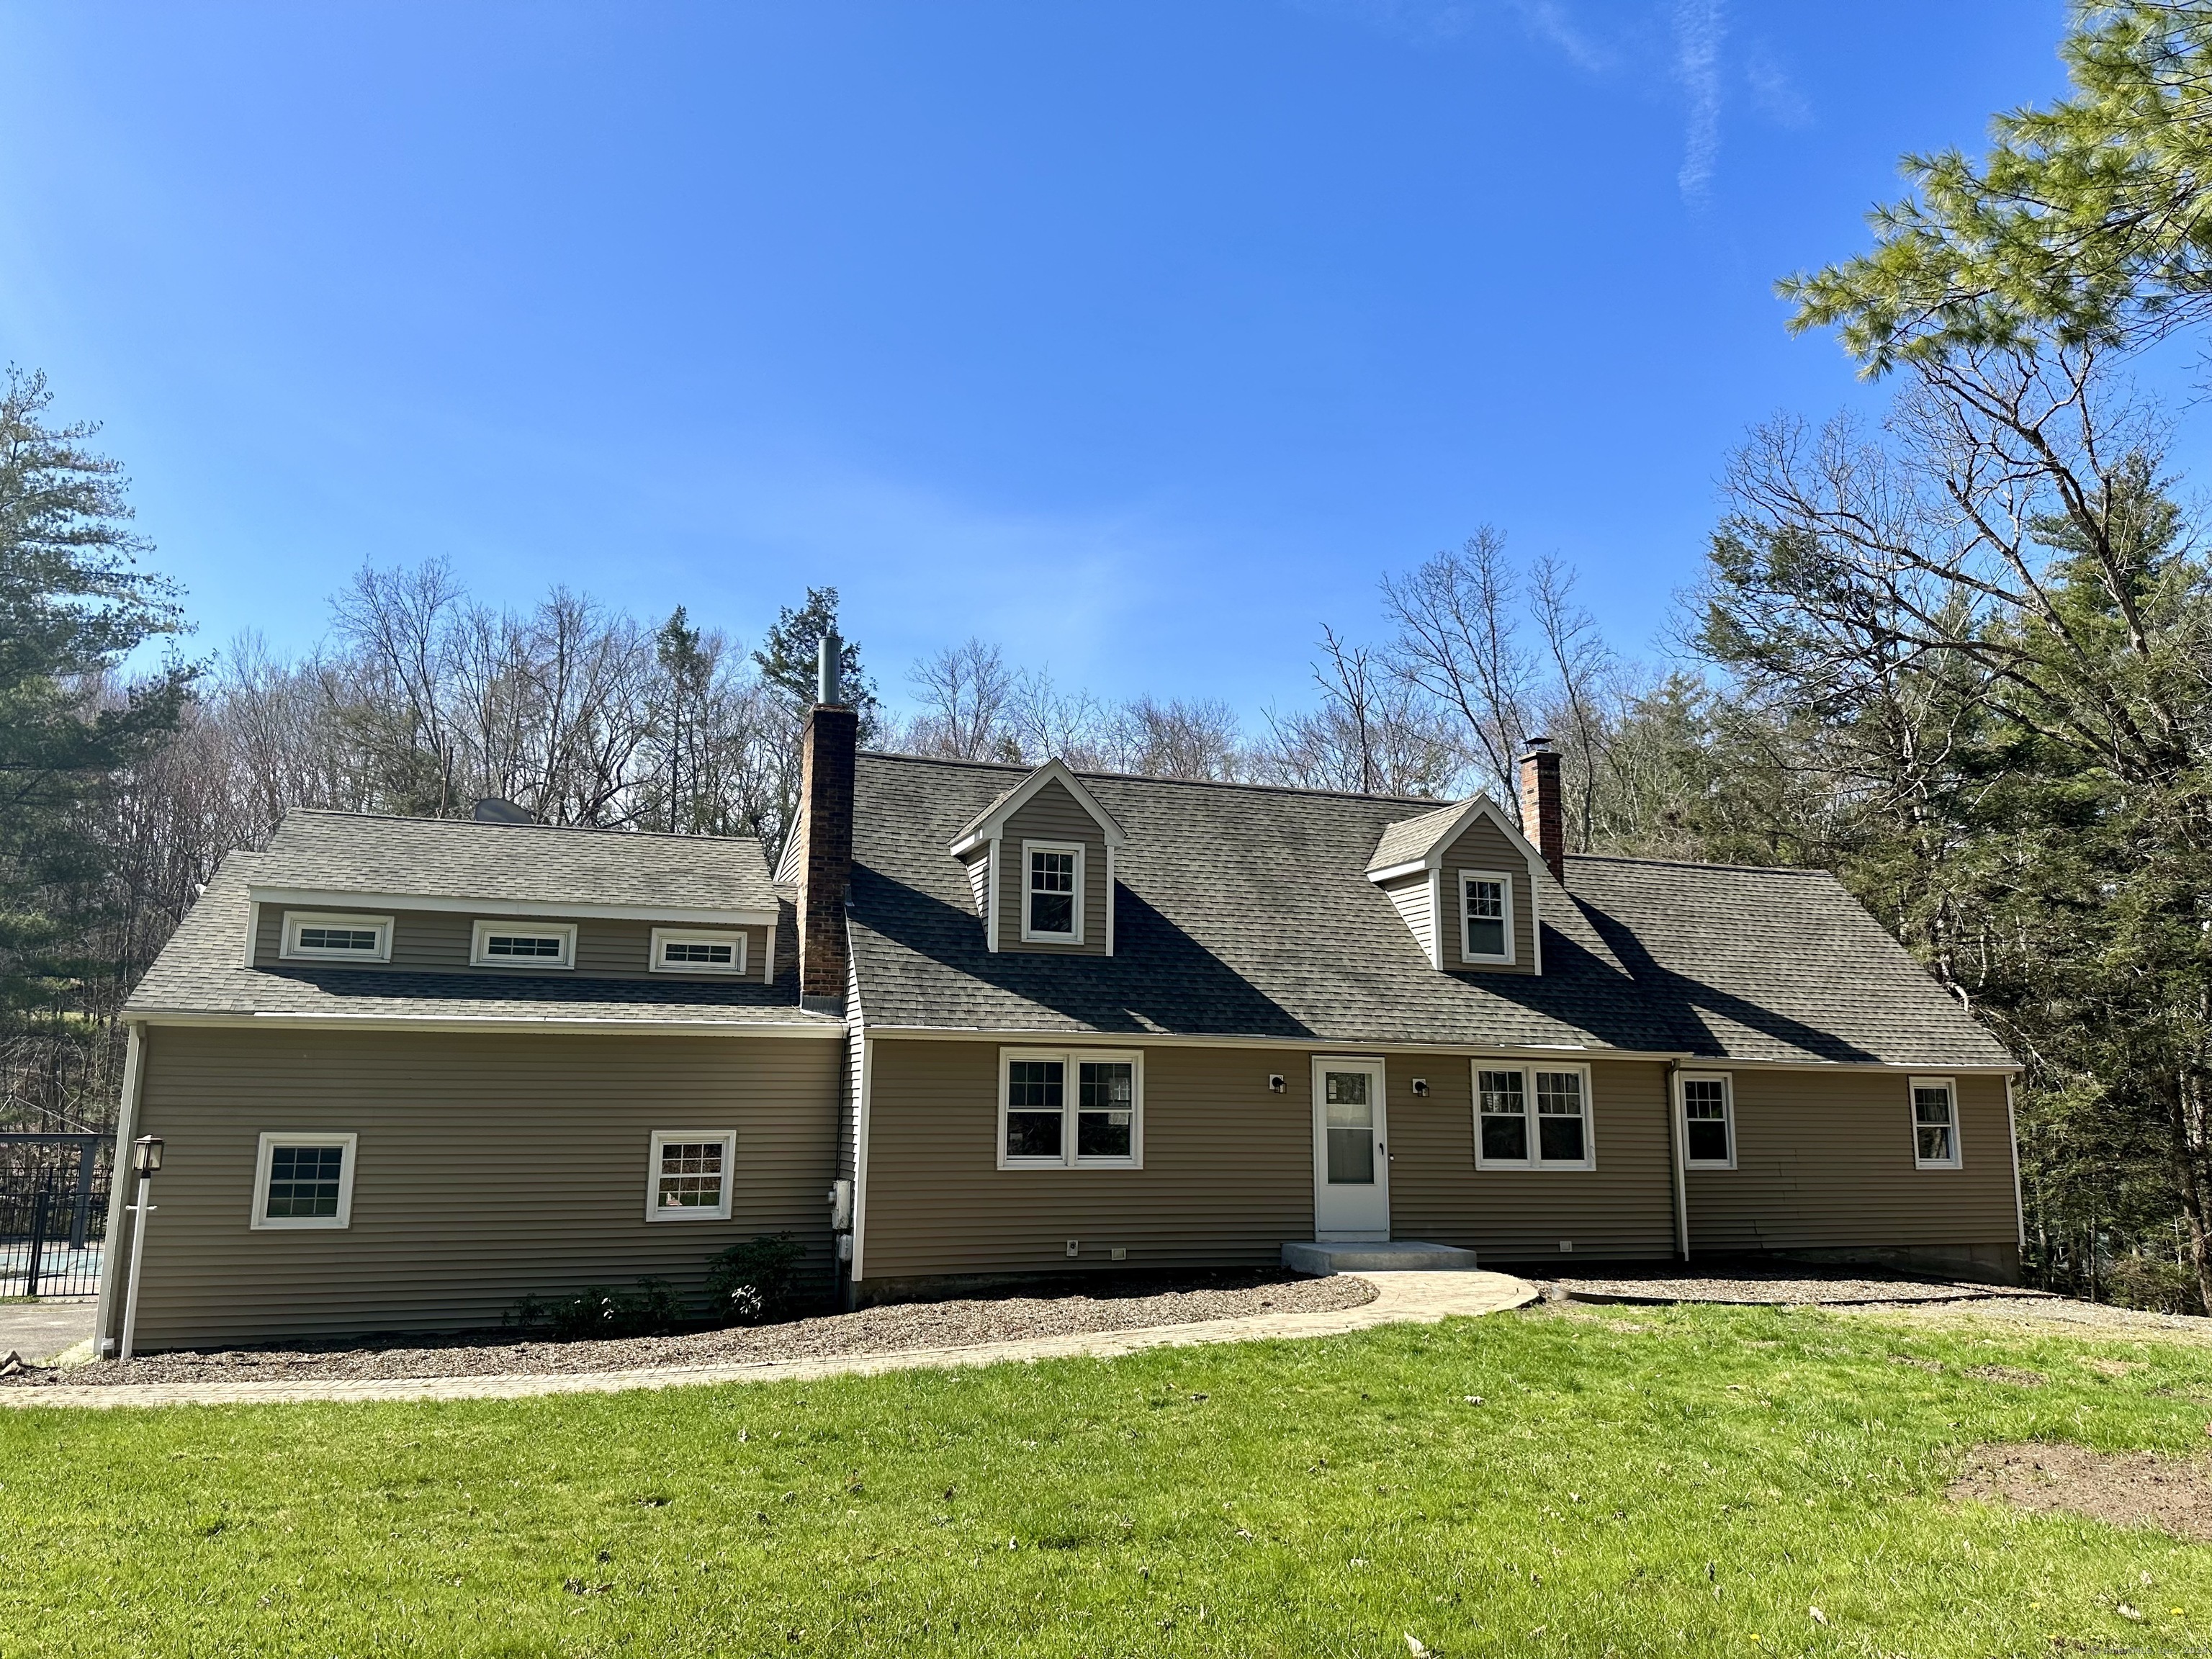 7 Saddle Drive, East Granby, CT 06026